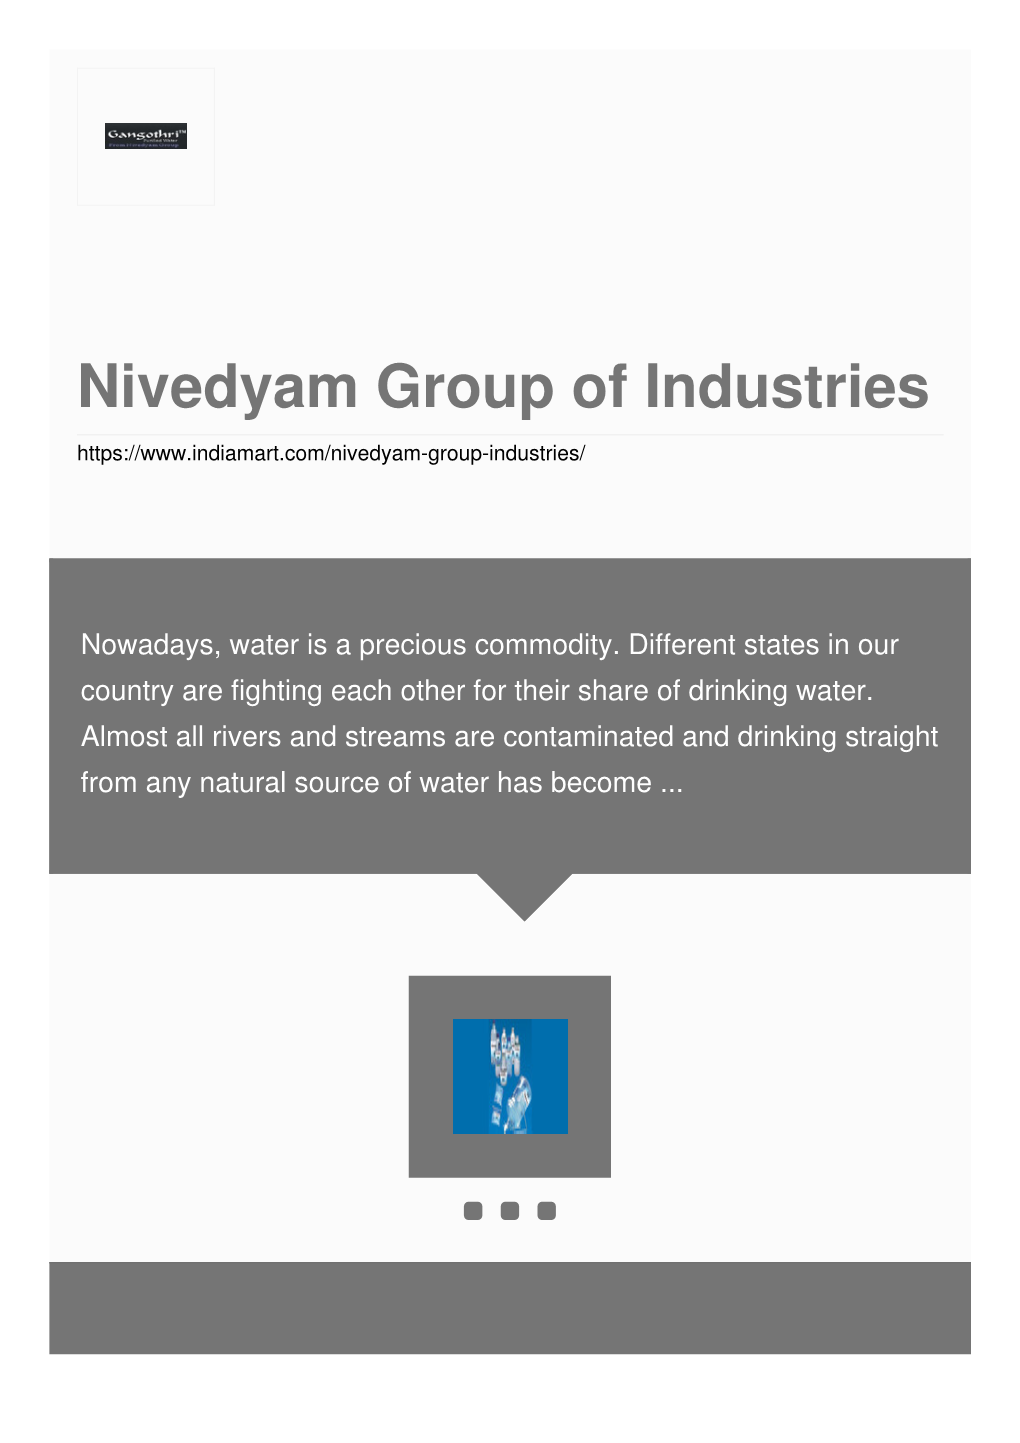 Nivedyam Group of Industries